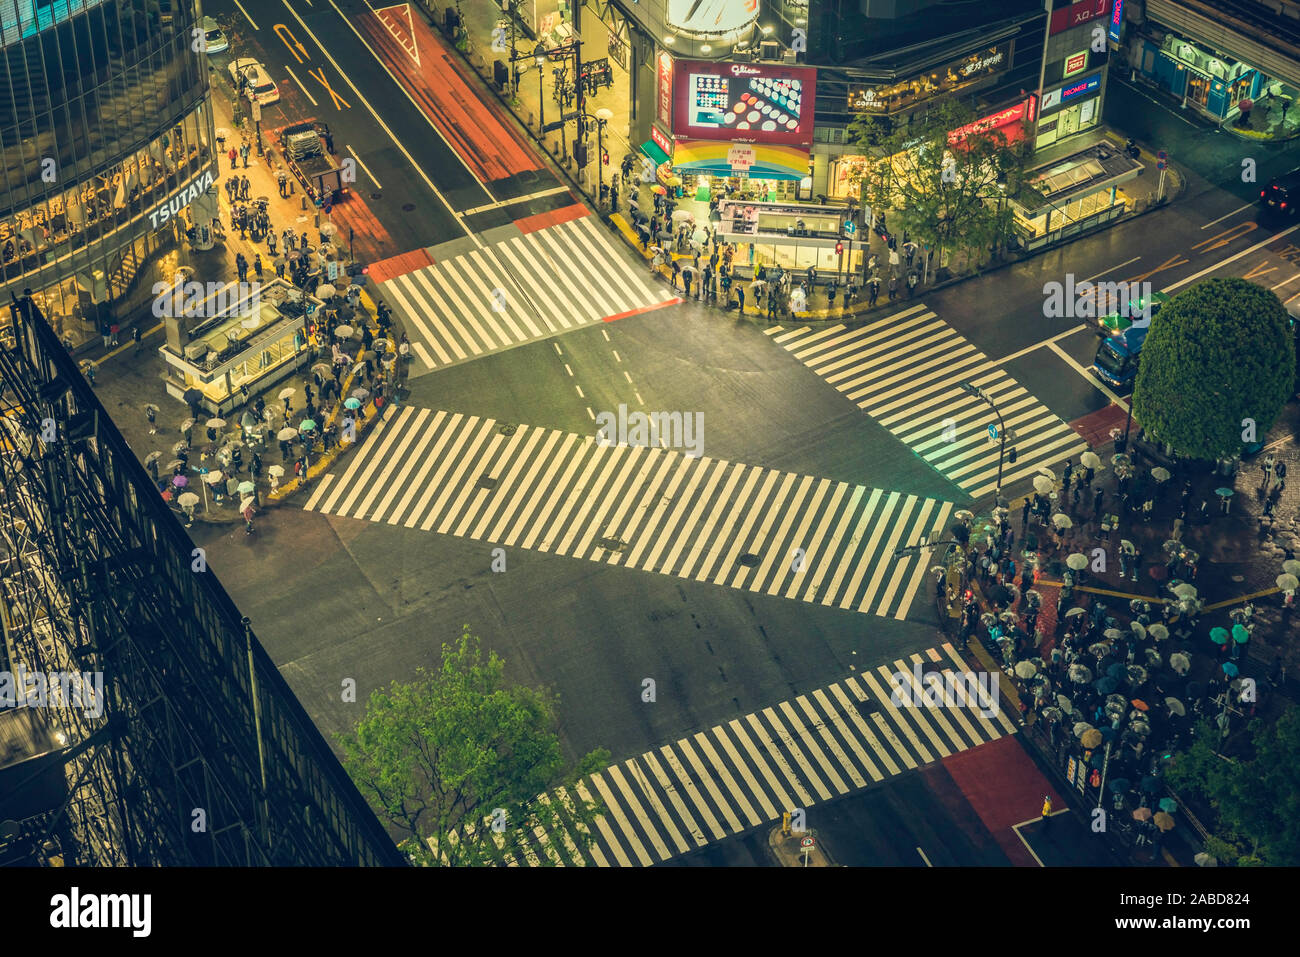 Pedestrian scramble crosswalk in Shibuya, Tokyo at night. It is famous to be one of the busiest crosswalks in the world Stock Photo